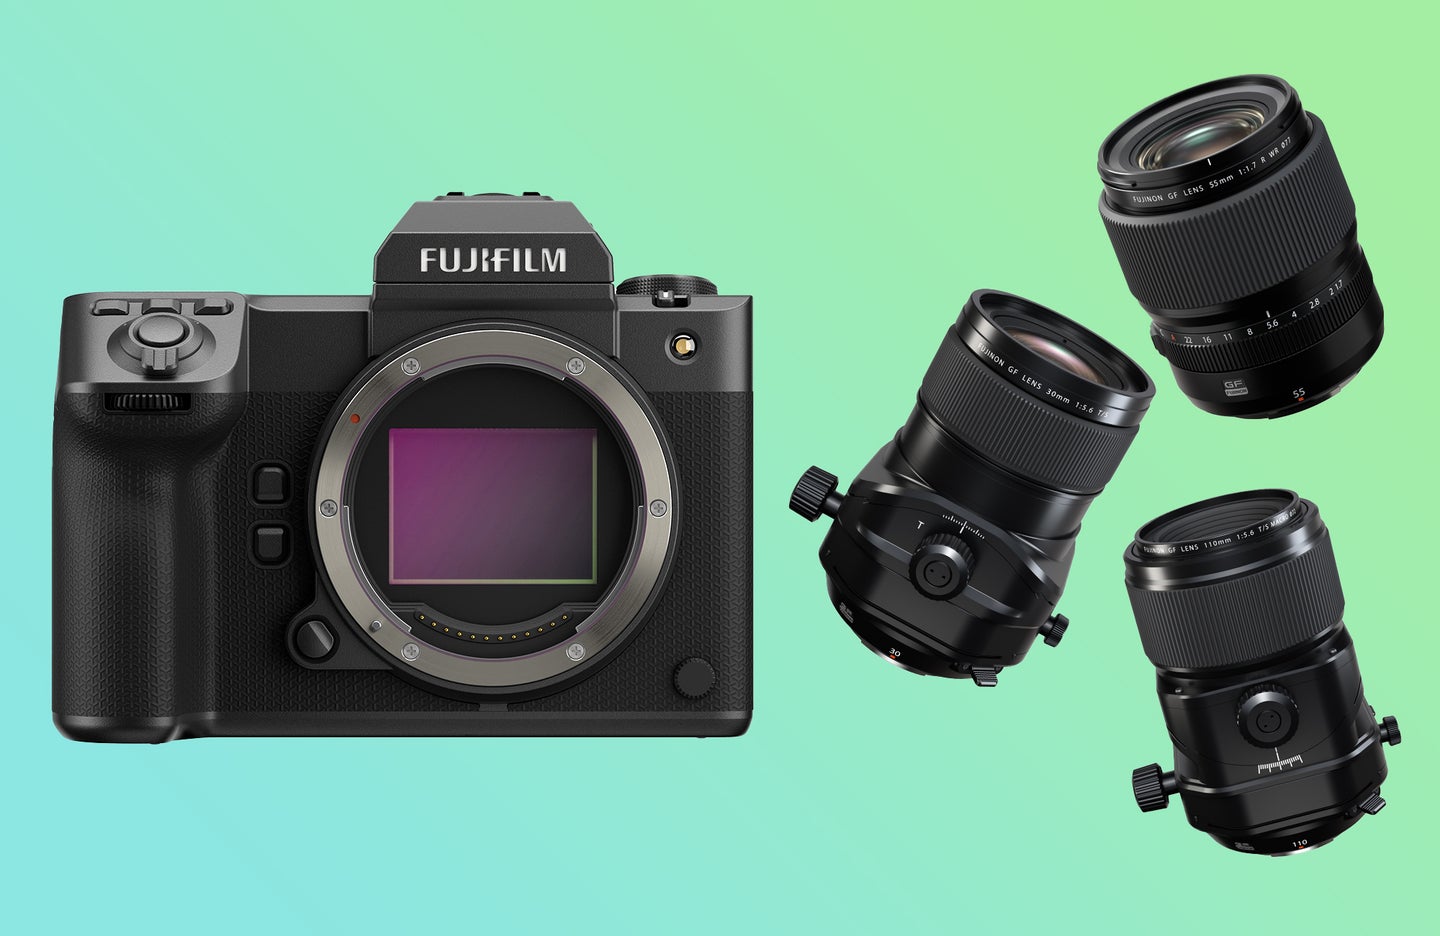 The Fujifilm GFX100 II is smaller, more capable, and yet cheaper